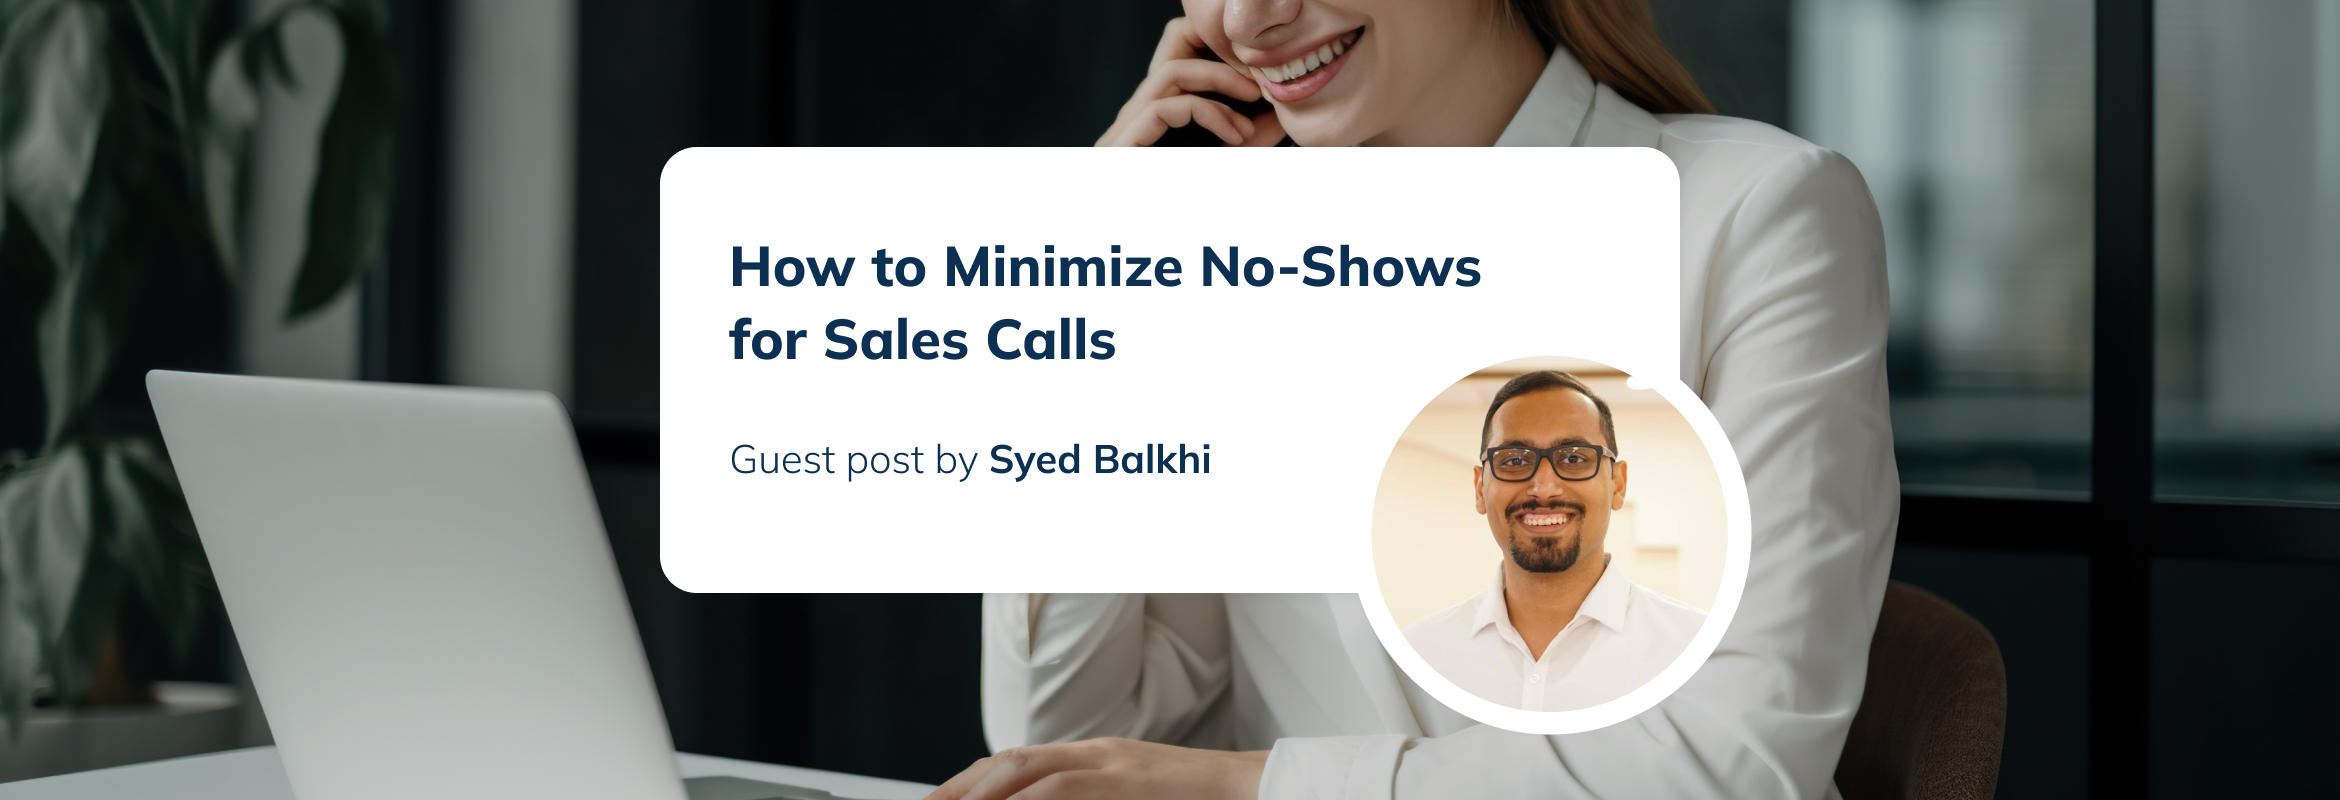 How to Minimize No-Shows for Sales Calls